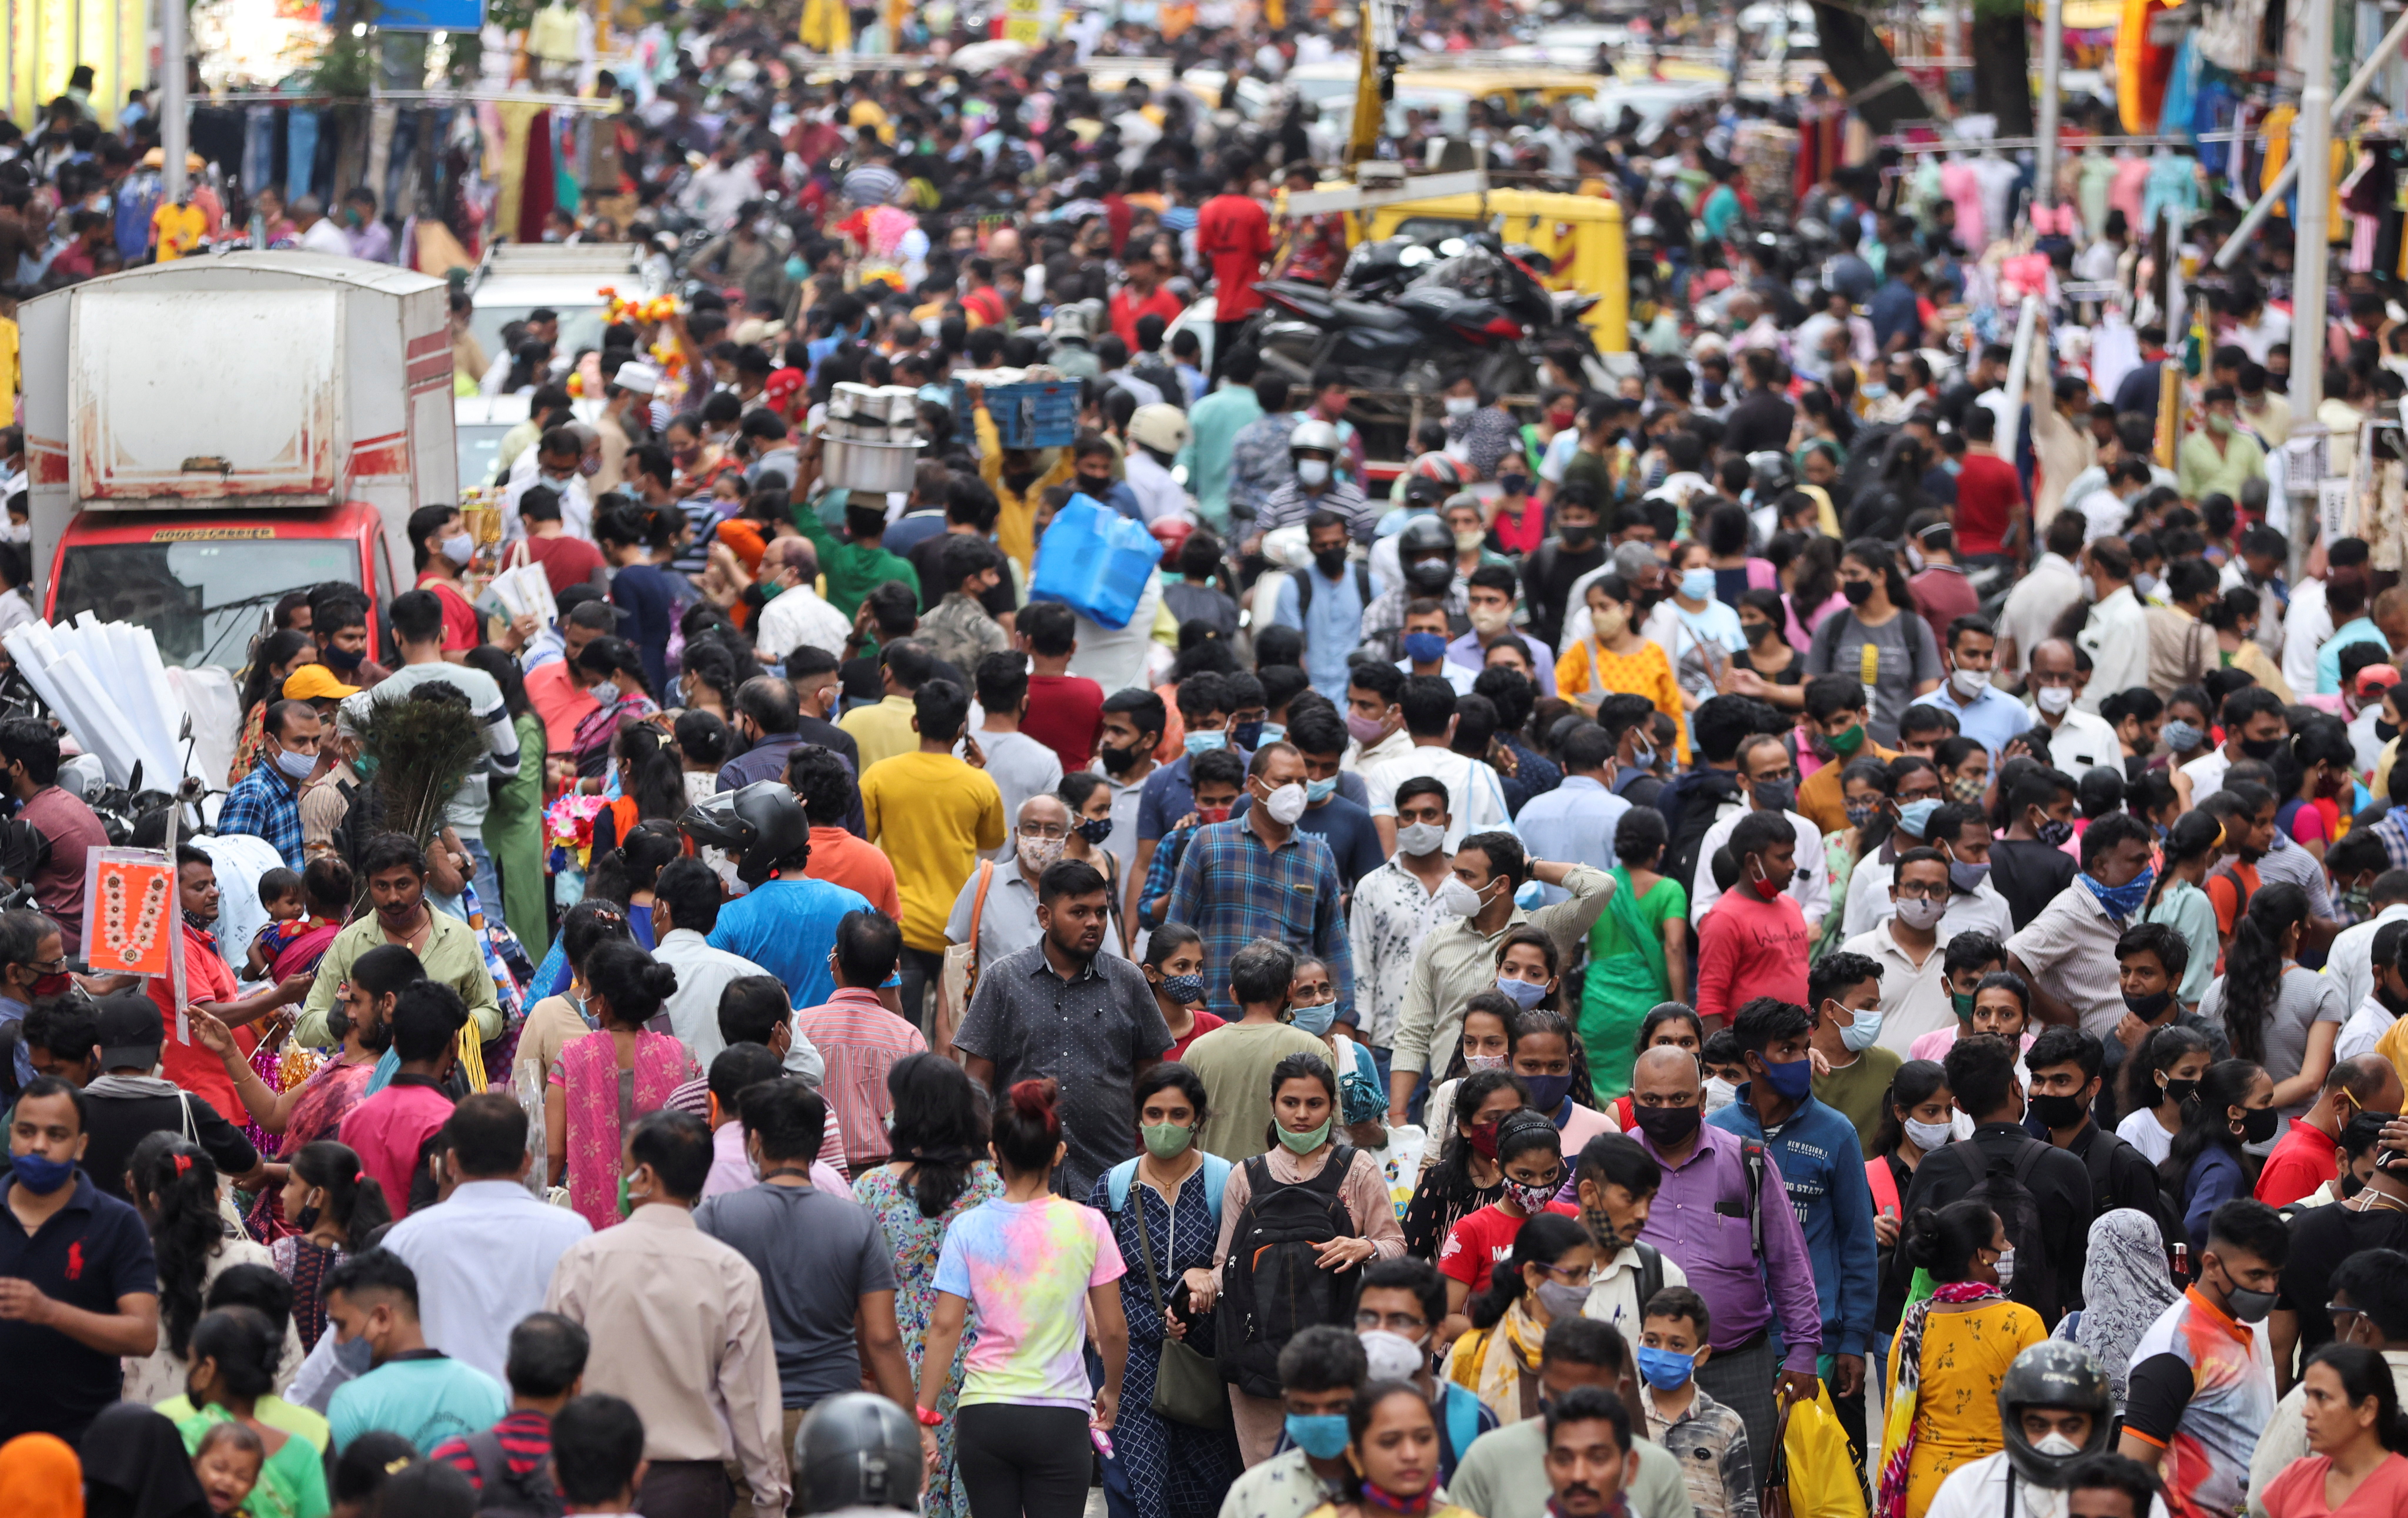 People walk in a crowded market amidst the spread of the coronavirus disease (COVID-19) in Mumbai